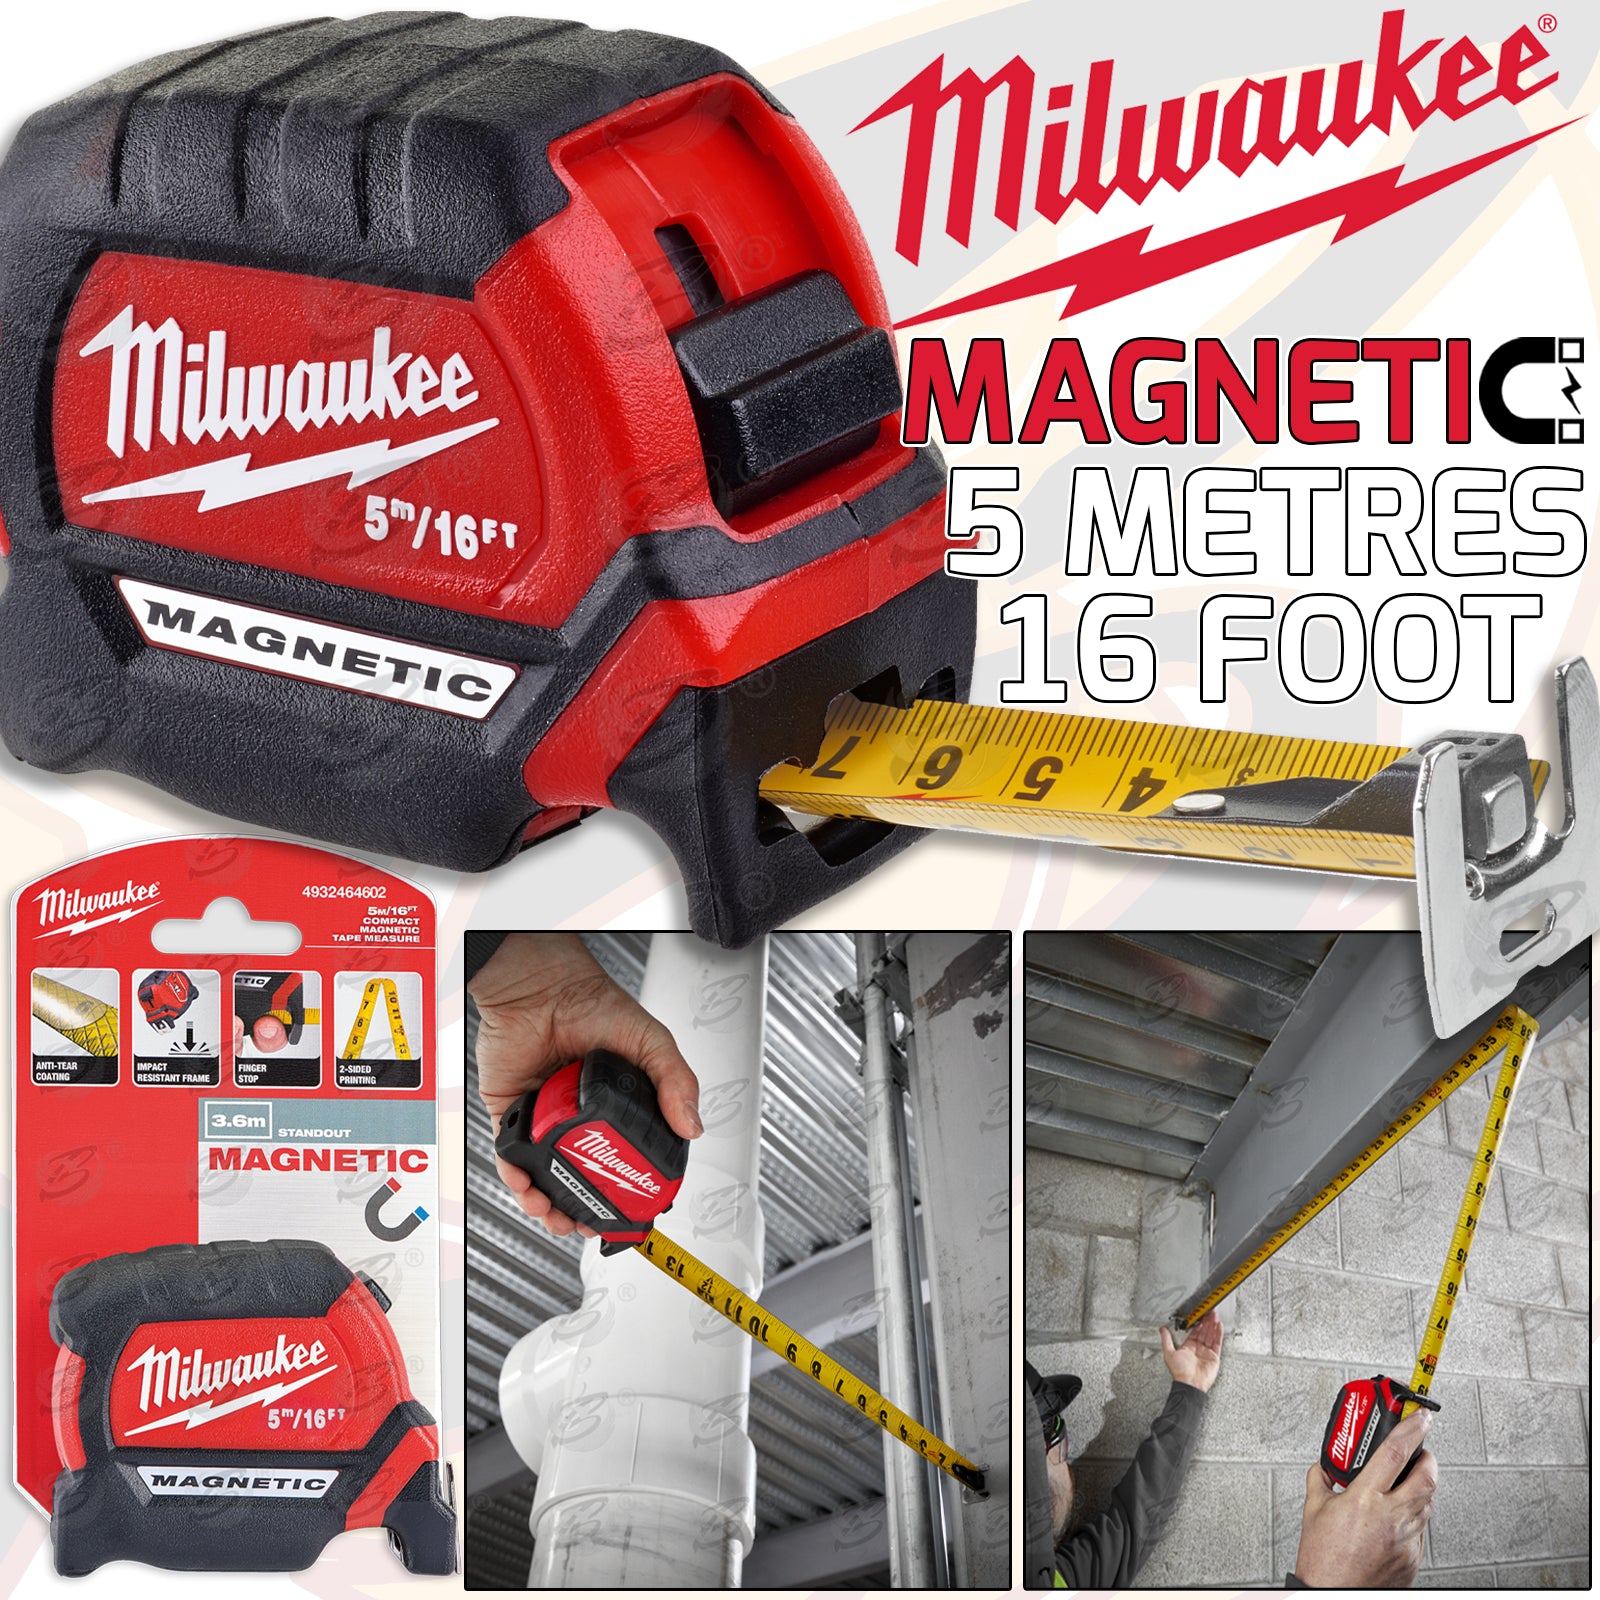 Milwaukee 5m Tape Measure Wide Blade 33mm 4932471815, Red